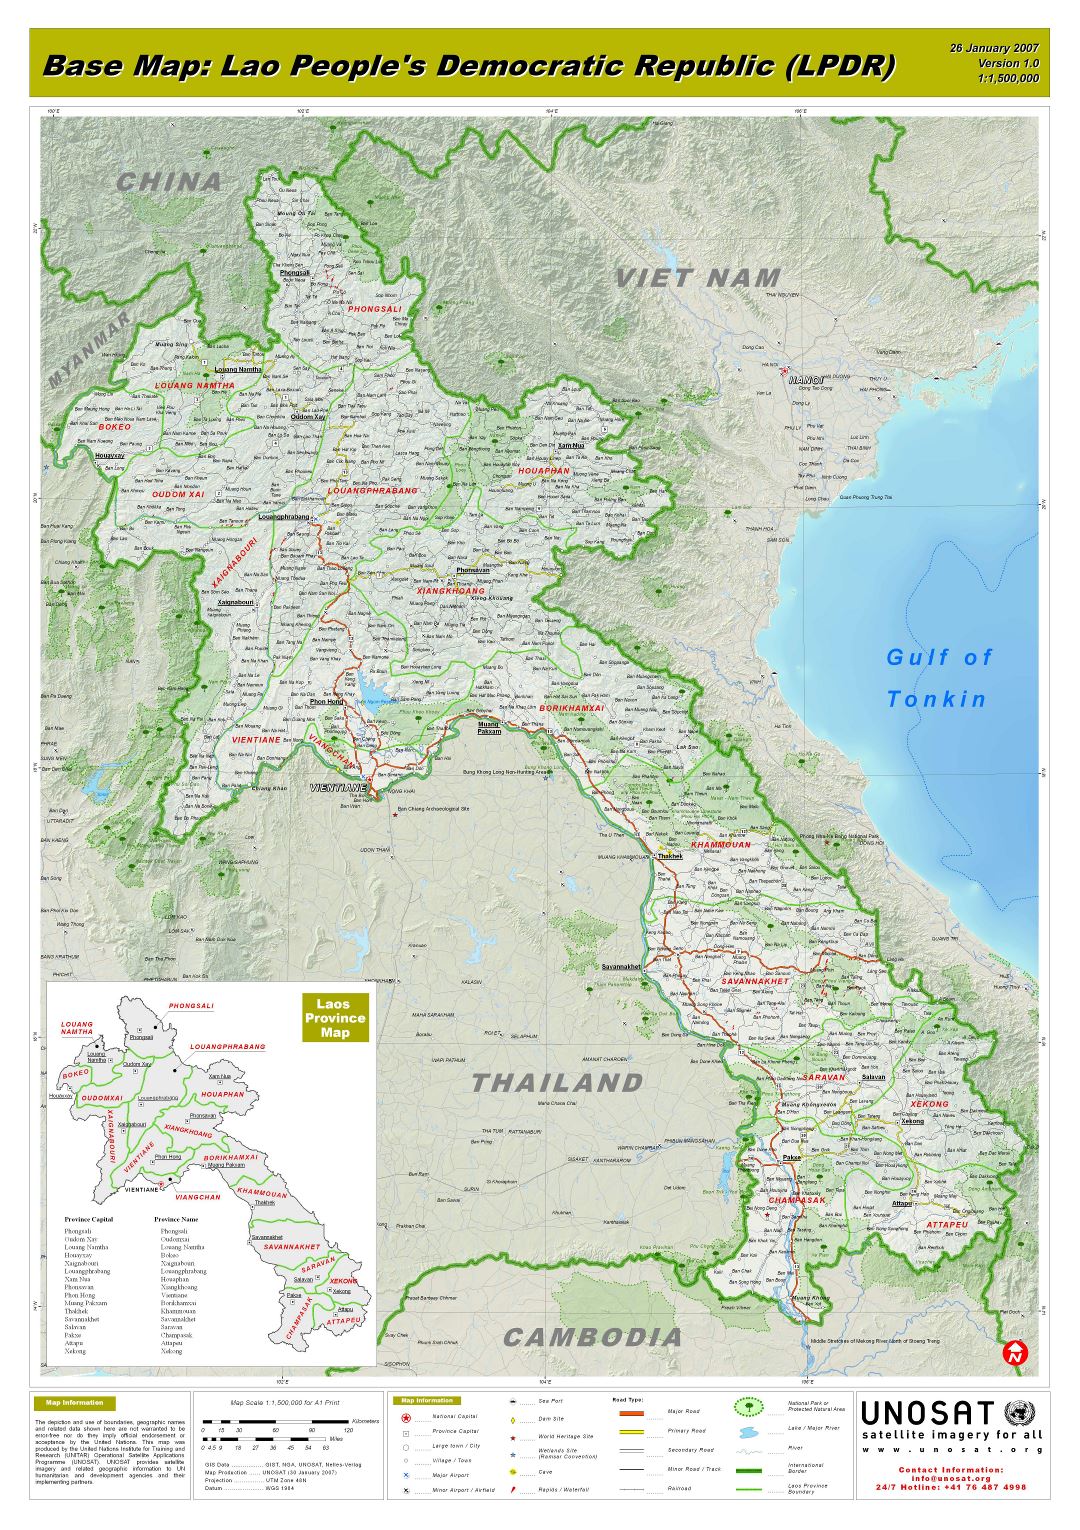 Large scale base map of Laos